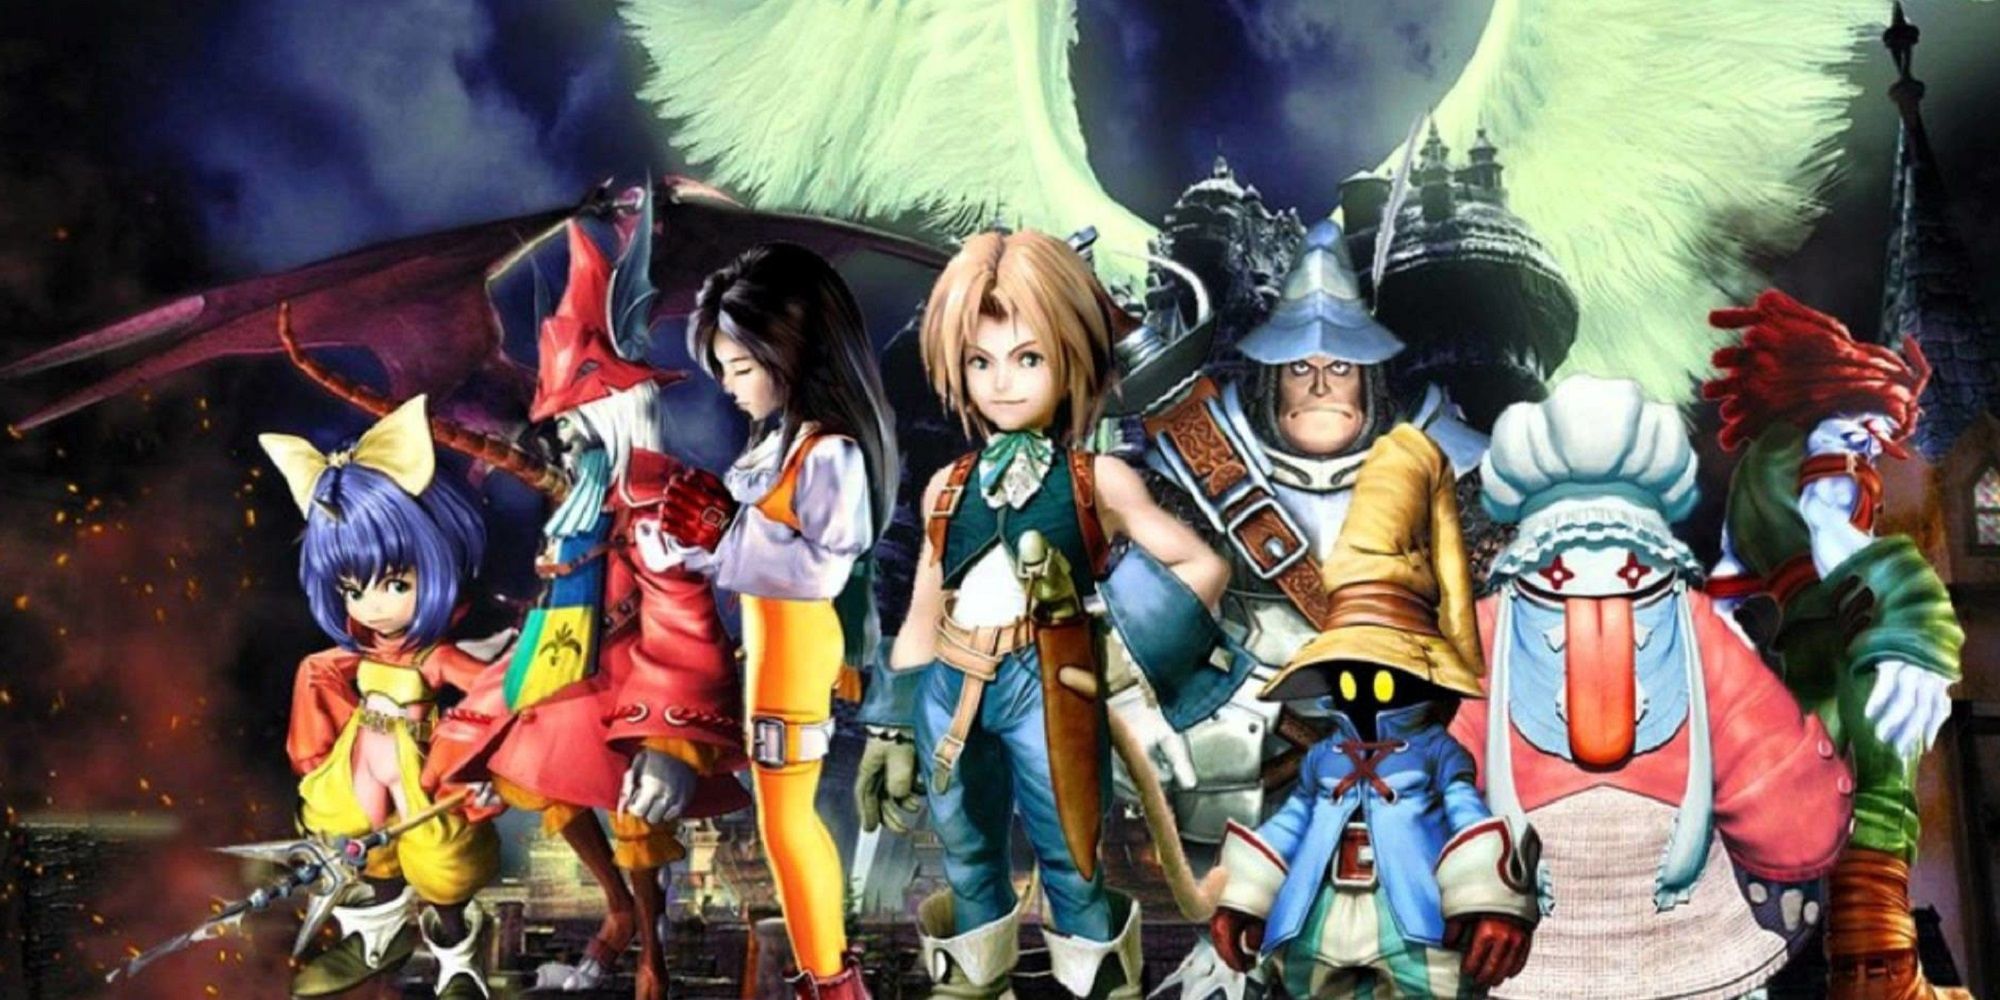 A Final Fantasy 9 remake is currently in development, reports